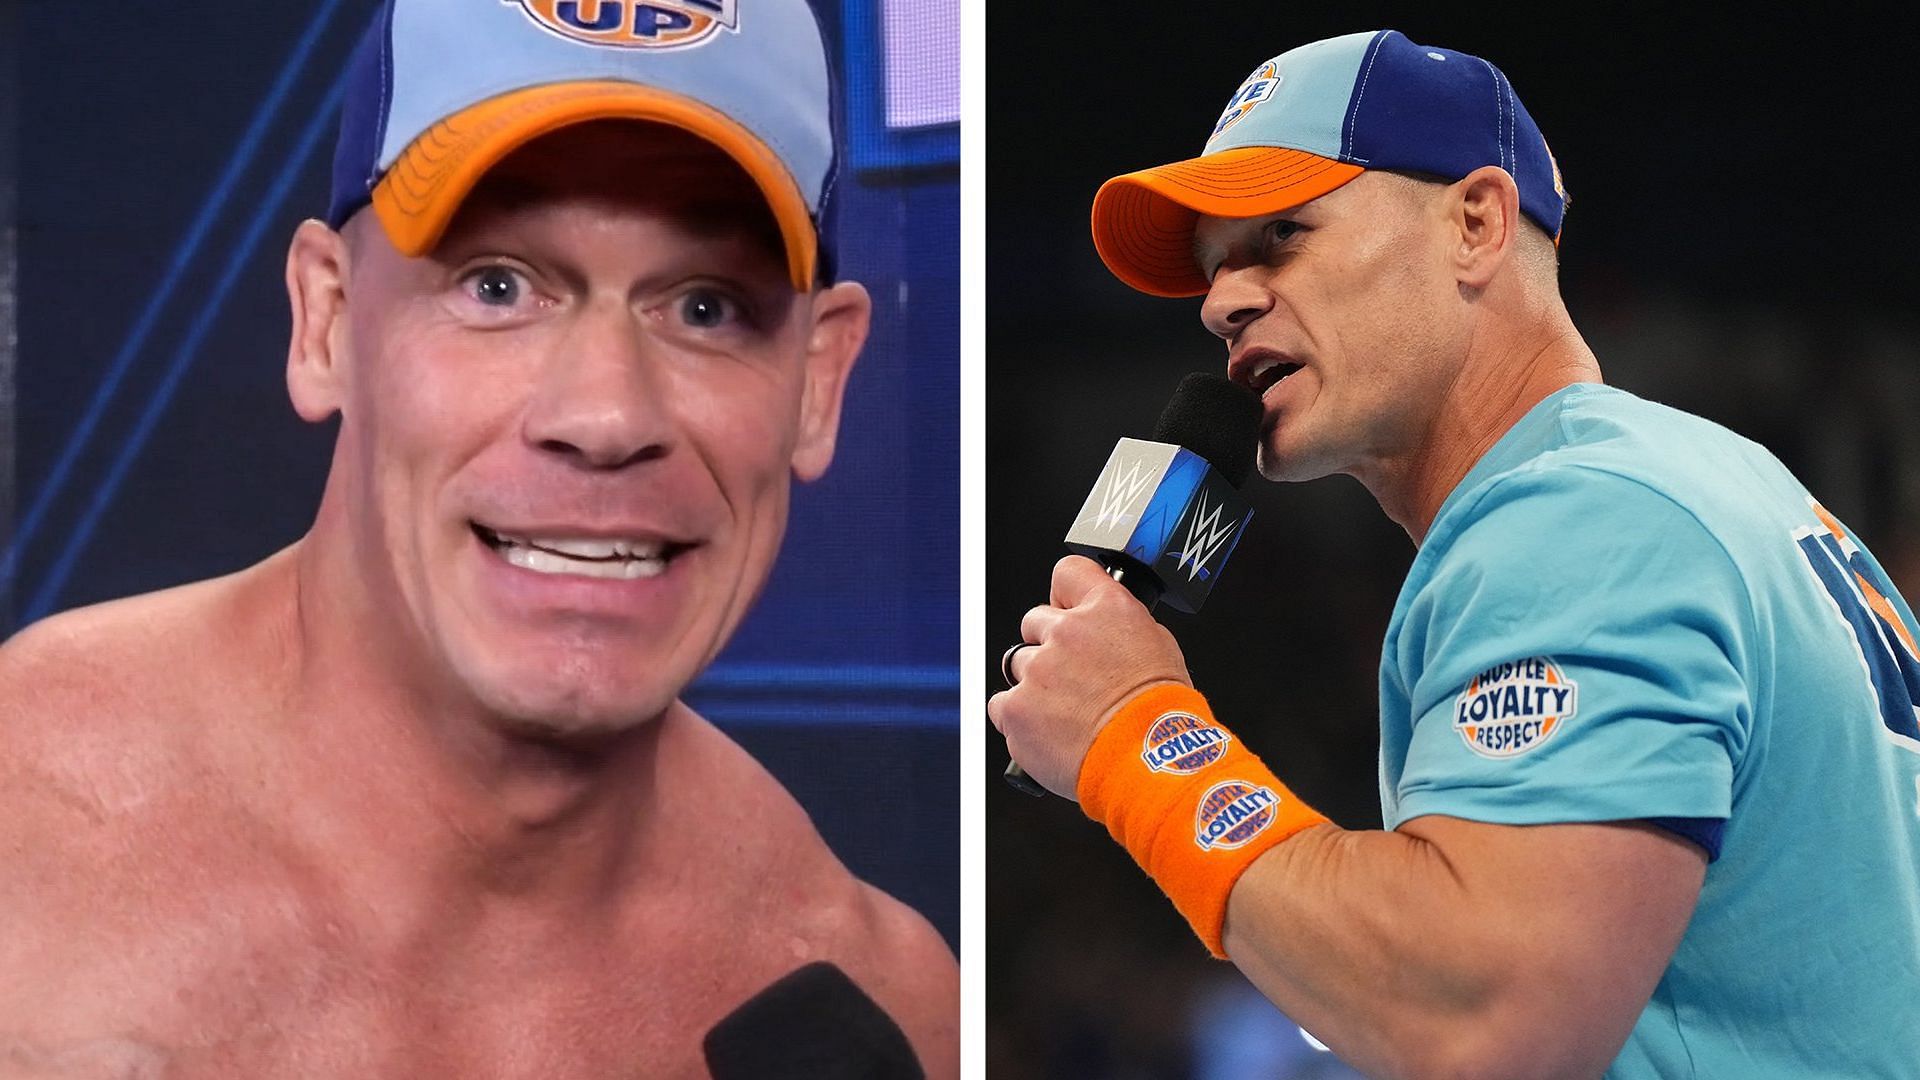 Is John Cena the greatest of all time in WWE history?